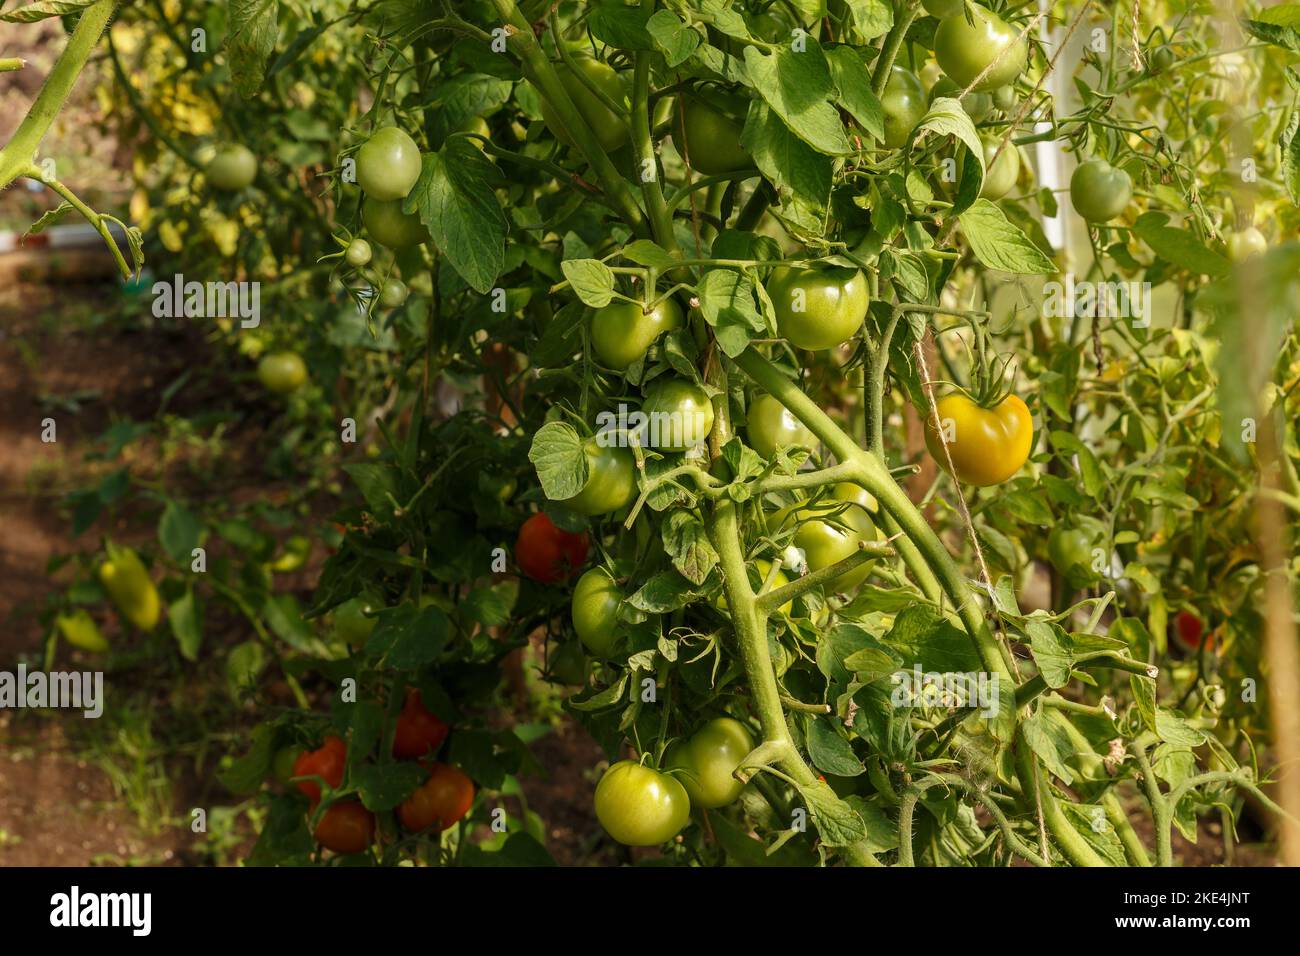 green tomatoes growing in a greenhouse. tomato hanging on a branch. tomatoes plantation. Organic farming Stock Photo